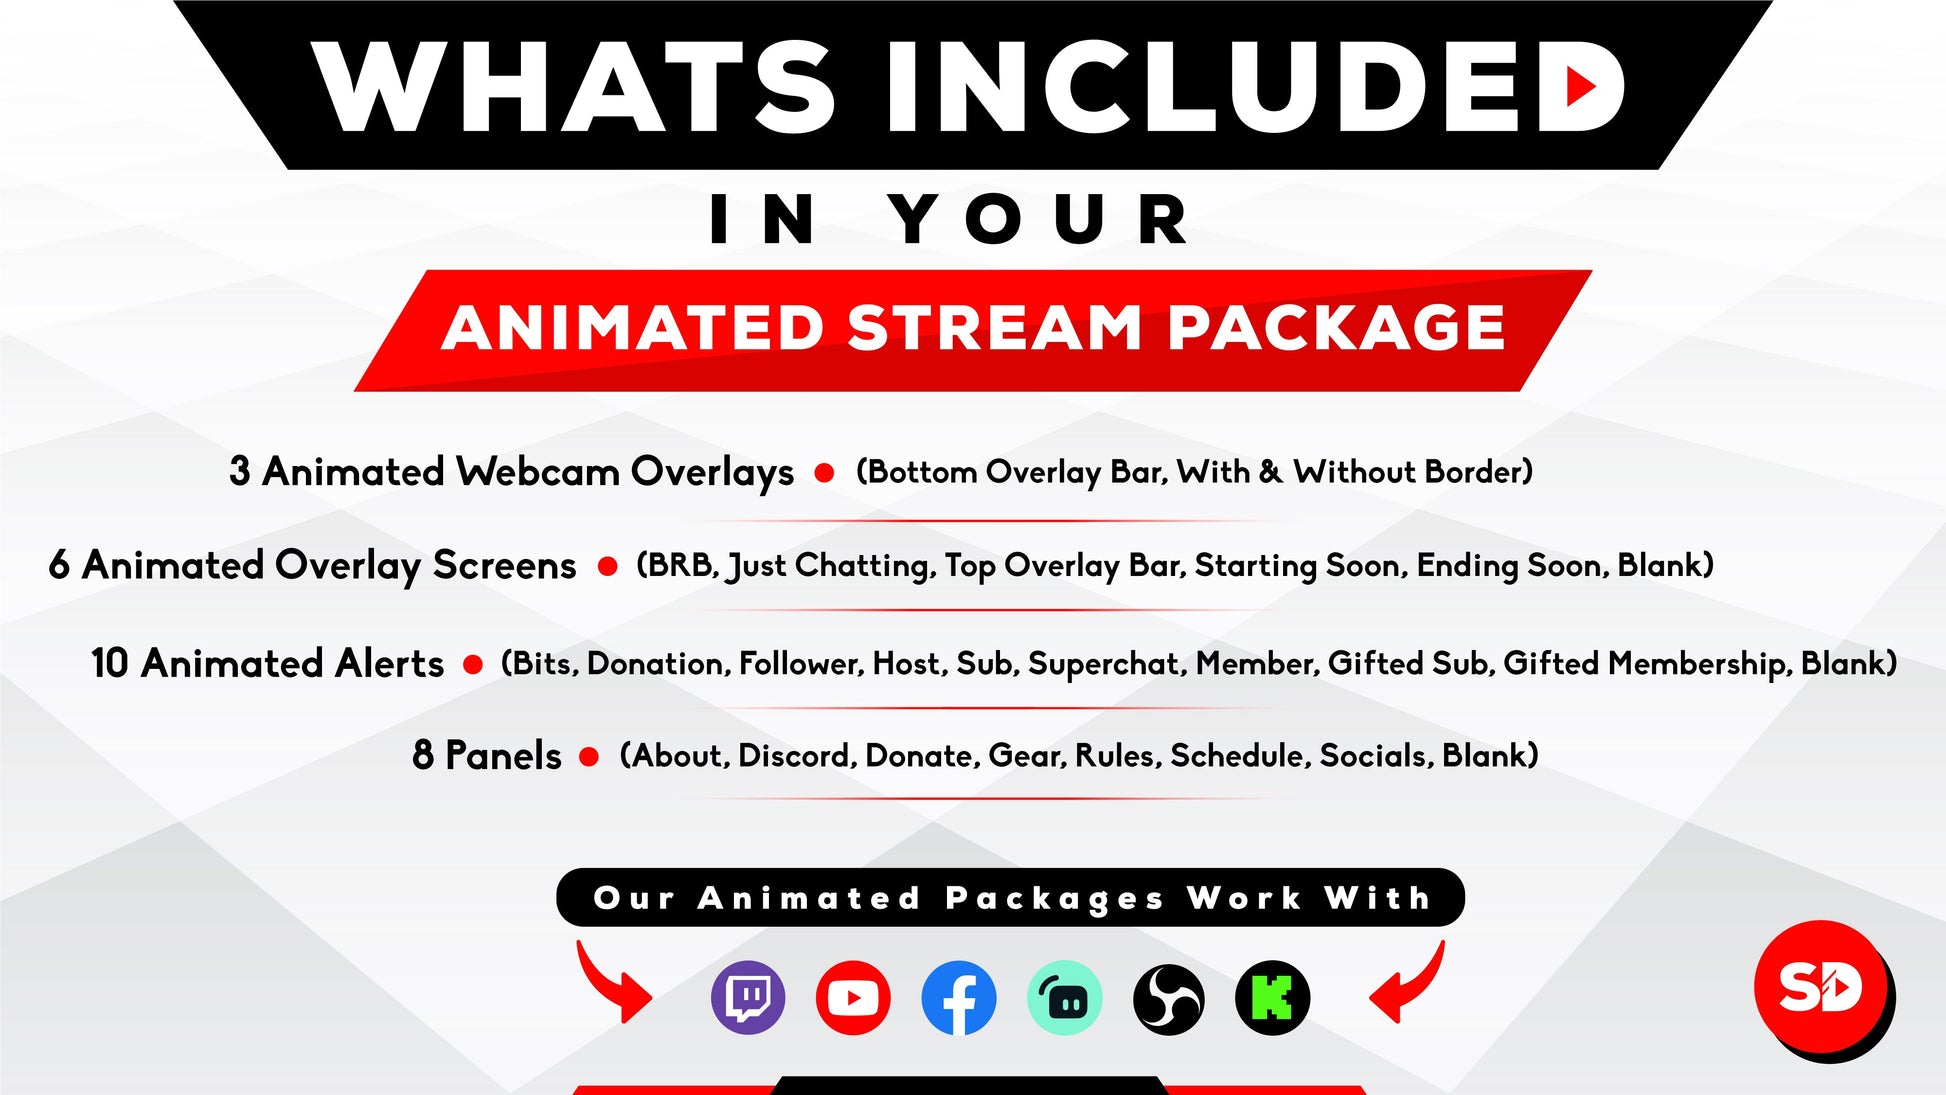 whats included in your stream package - animated overlay package - matrix - stream designz